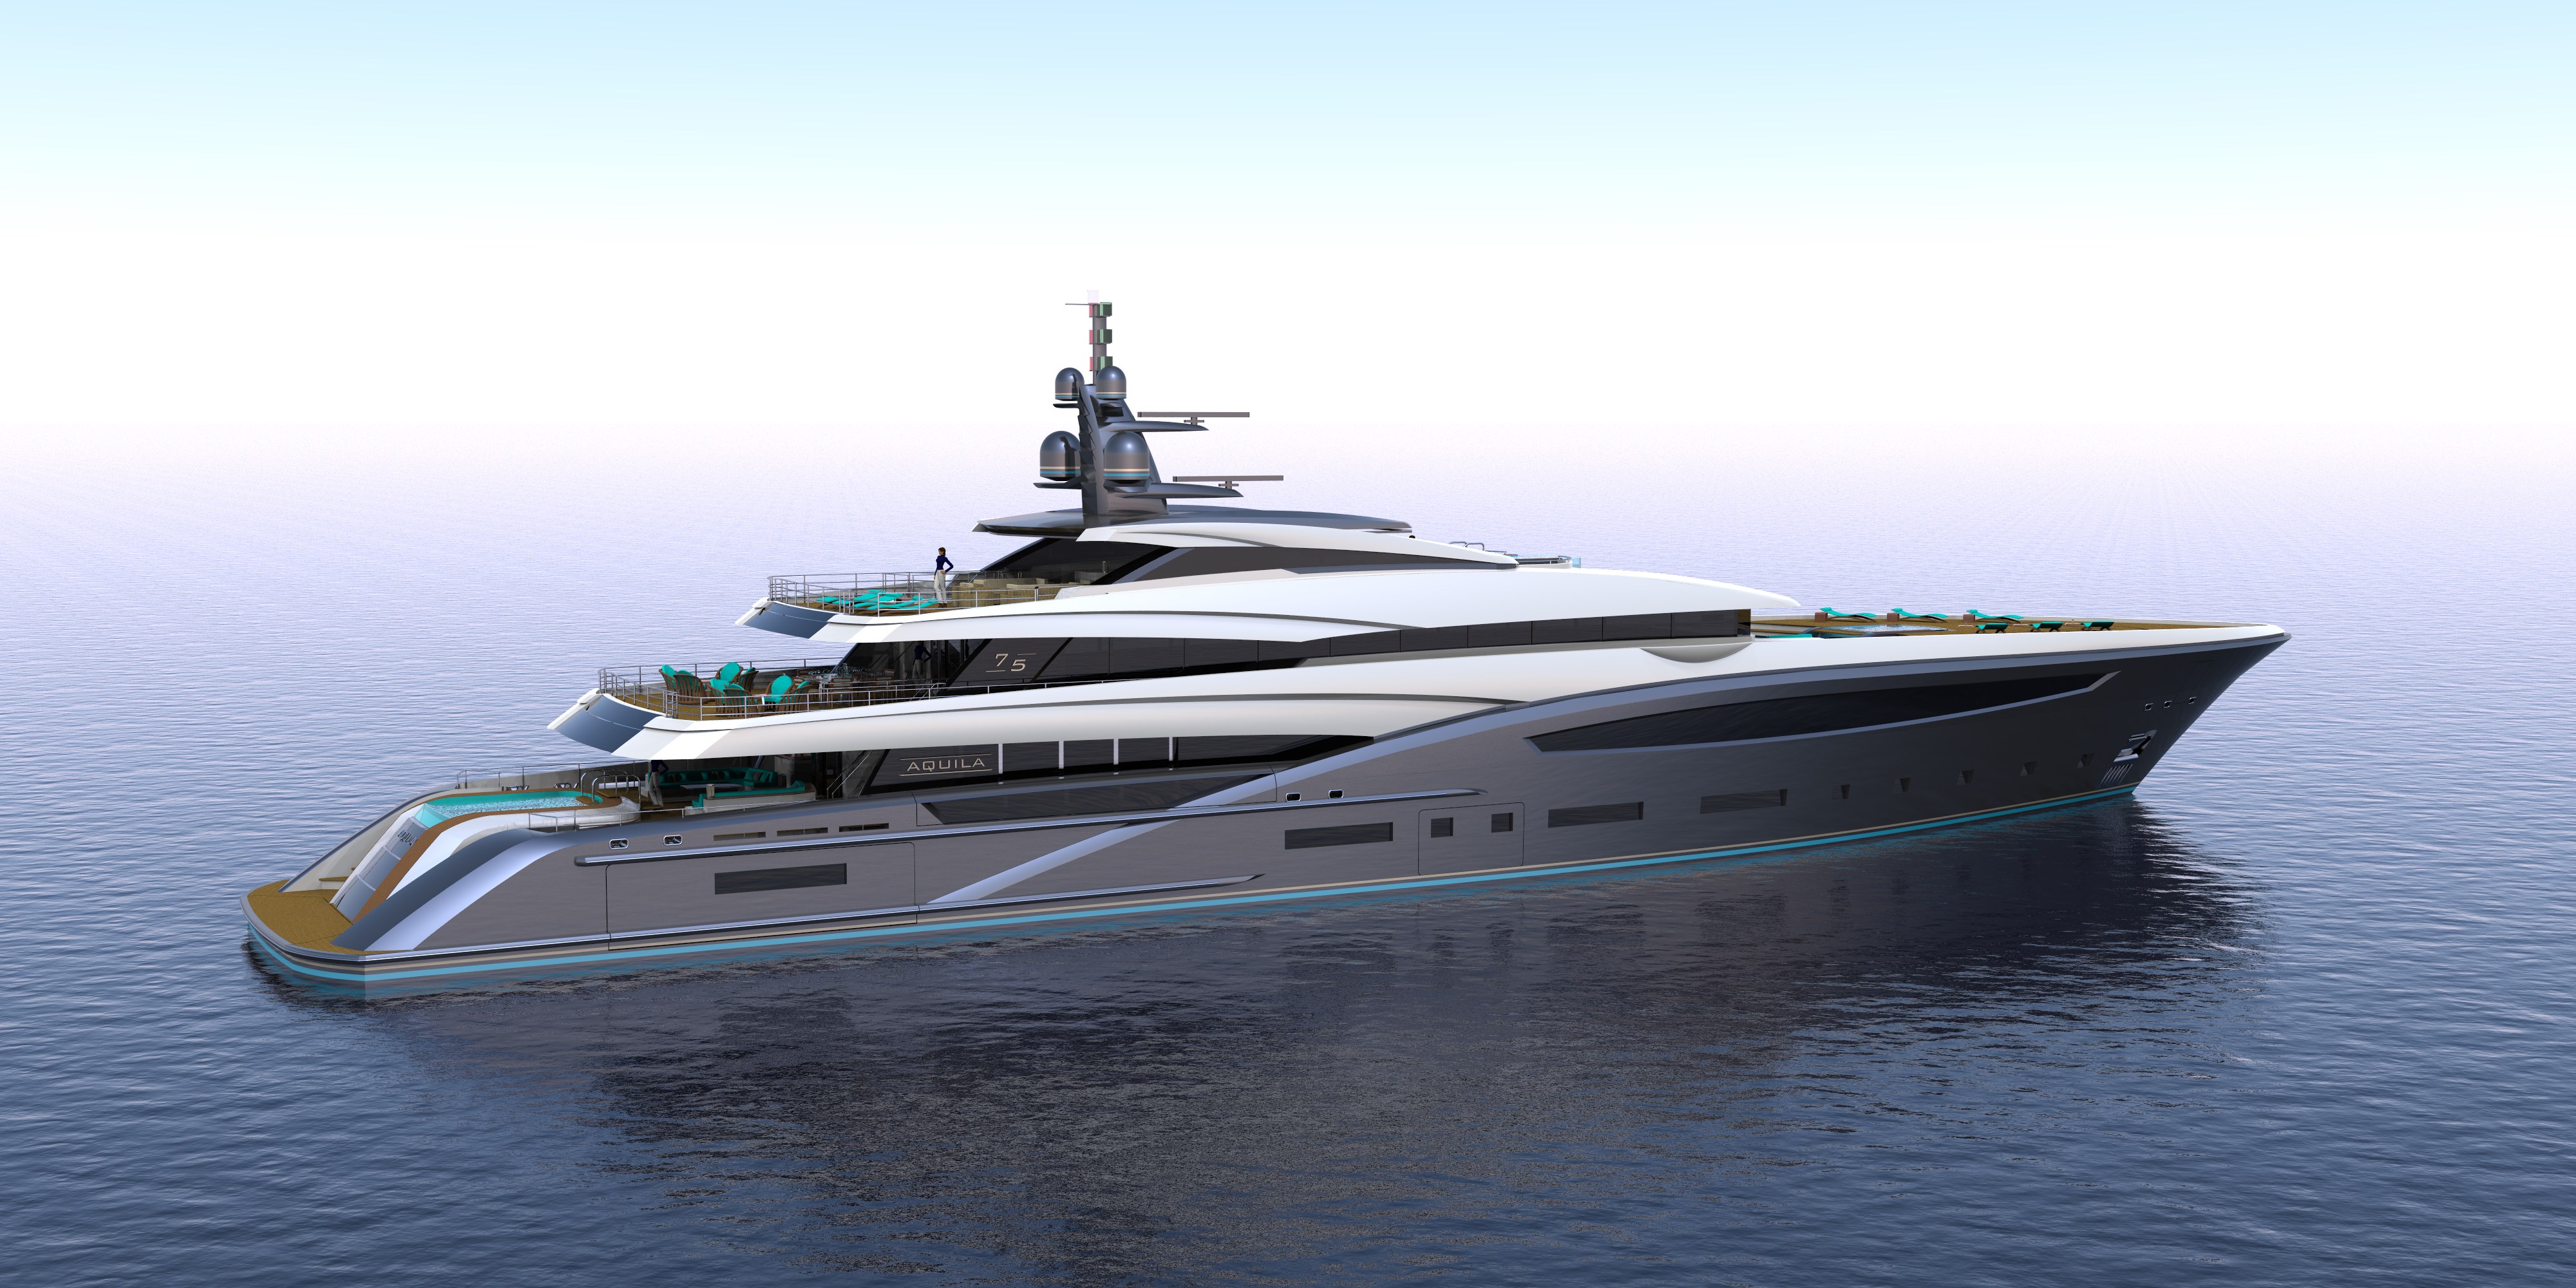 CUSTOM YACHT 75M specs with detailed specification and builder summary